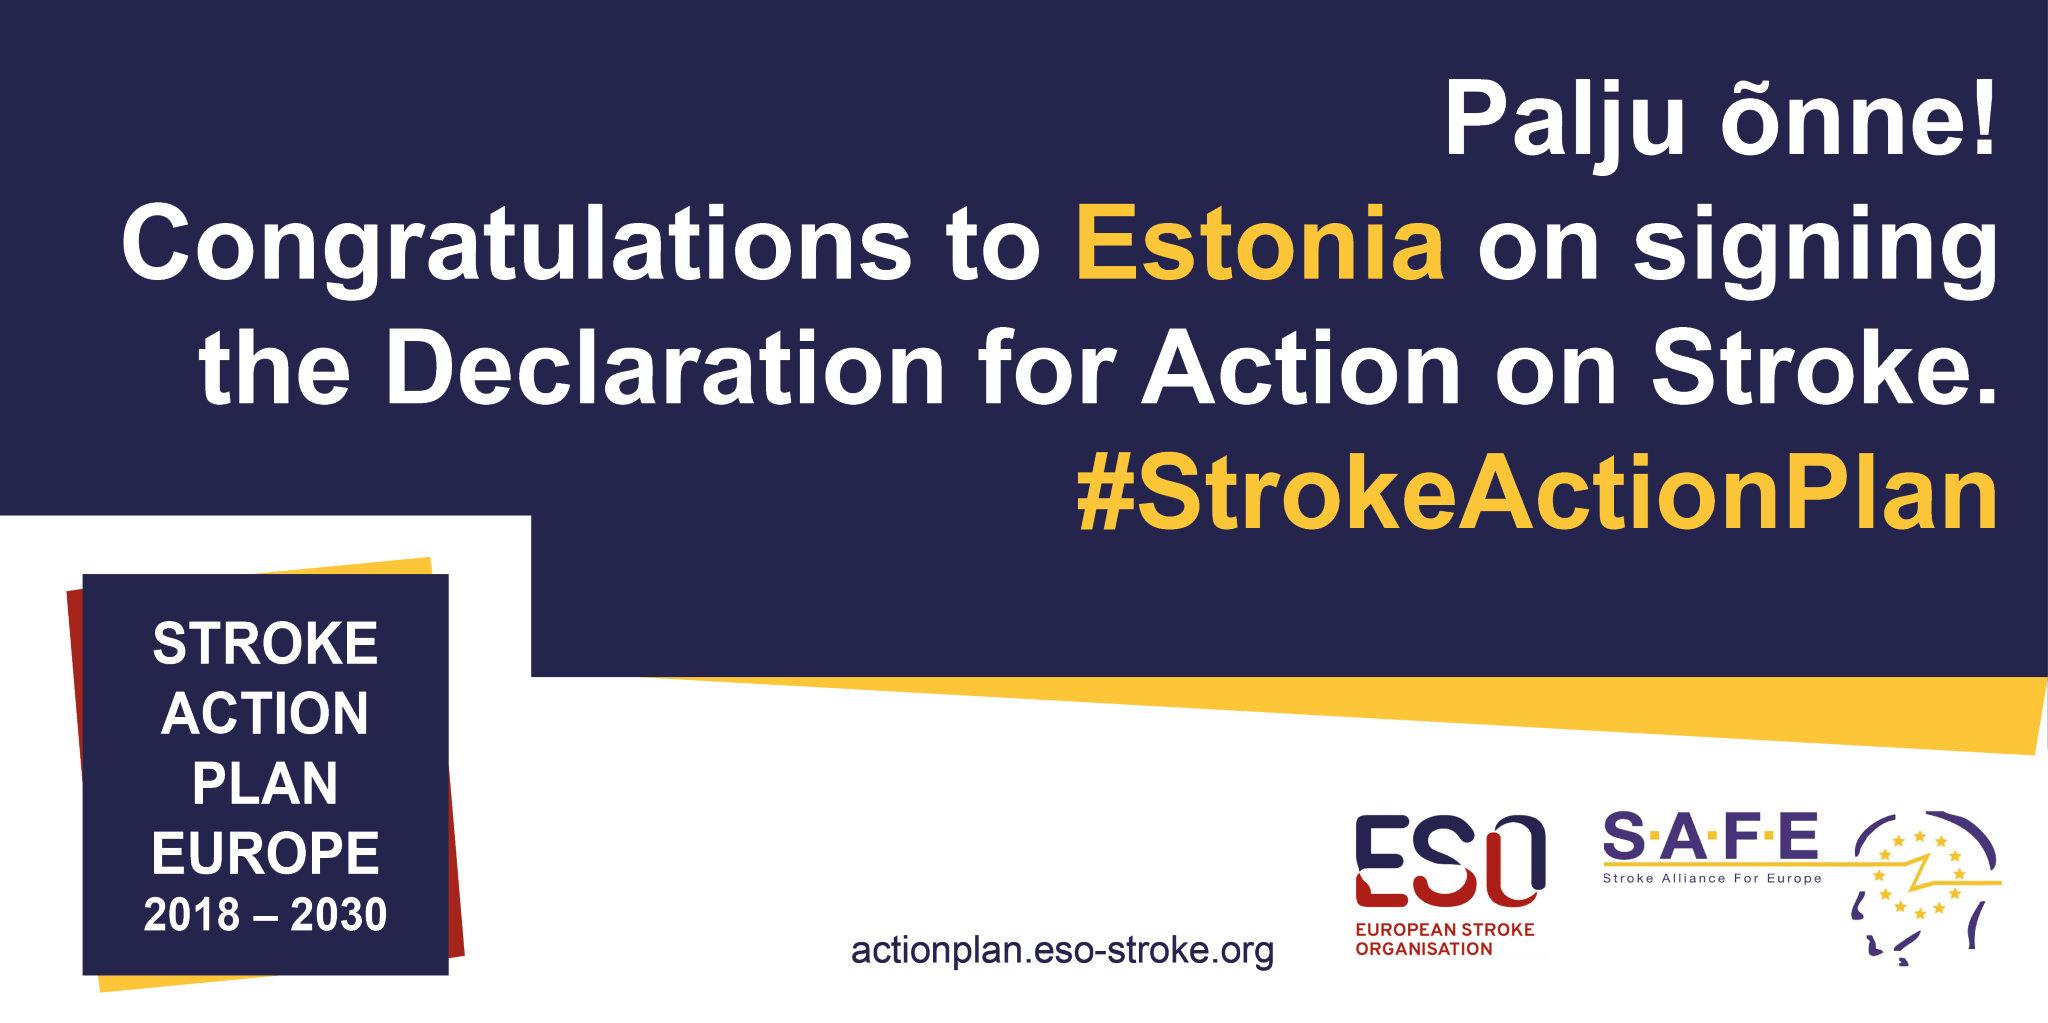 Estonia signs the Stroke Action Plan for Europe Declaration